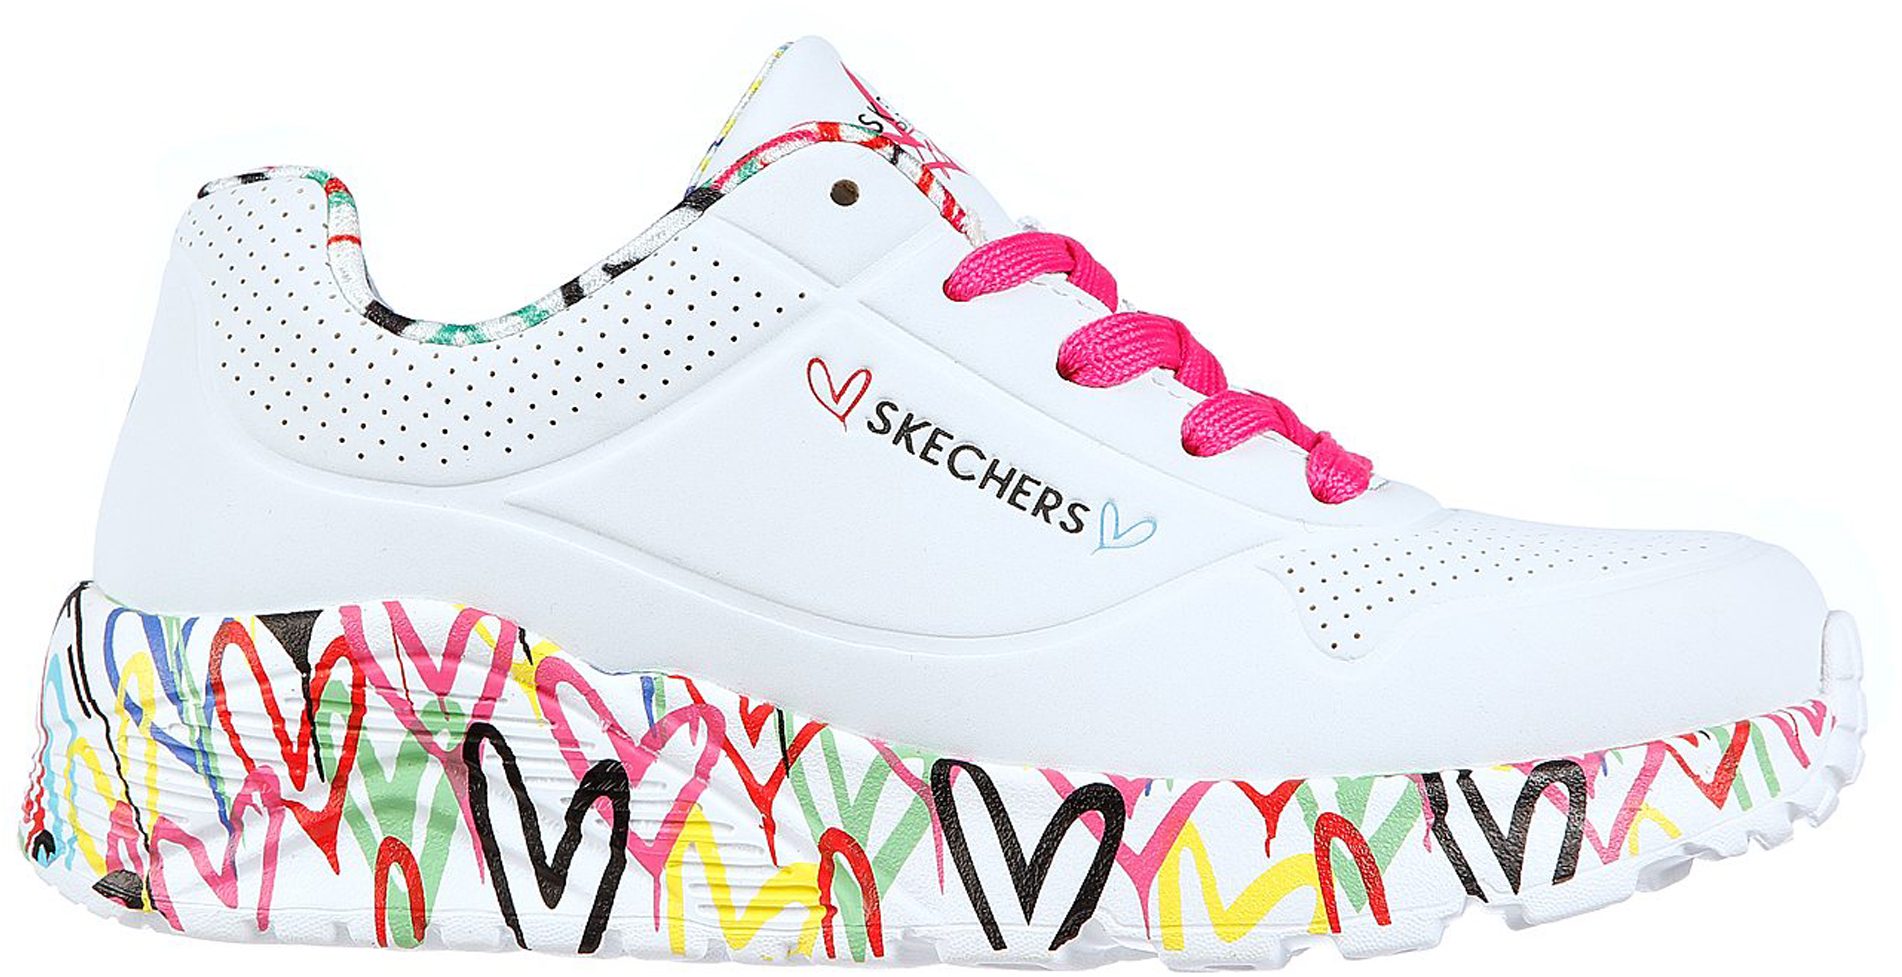 Skechers x JGoldcrown: Uno Lite - Lovely Luv White / Multi 314976L WMLT ...